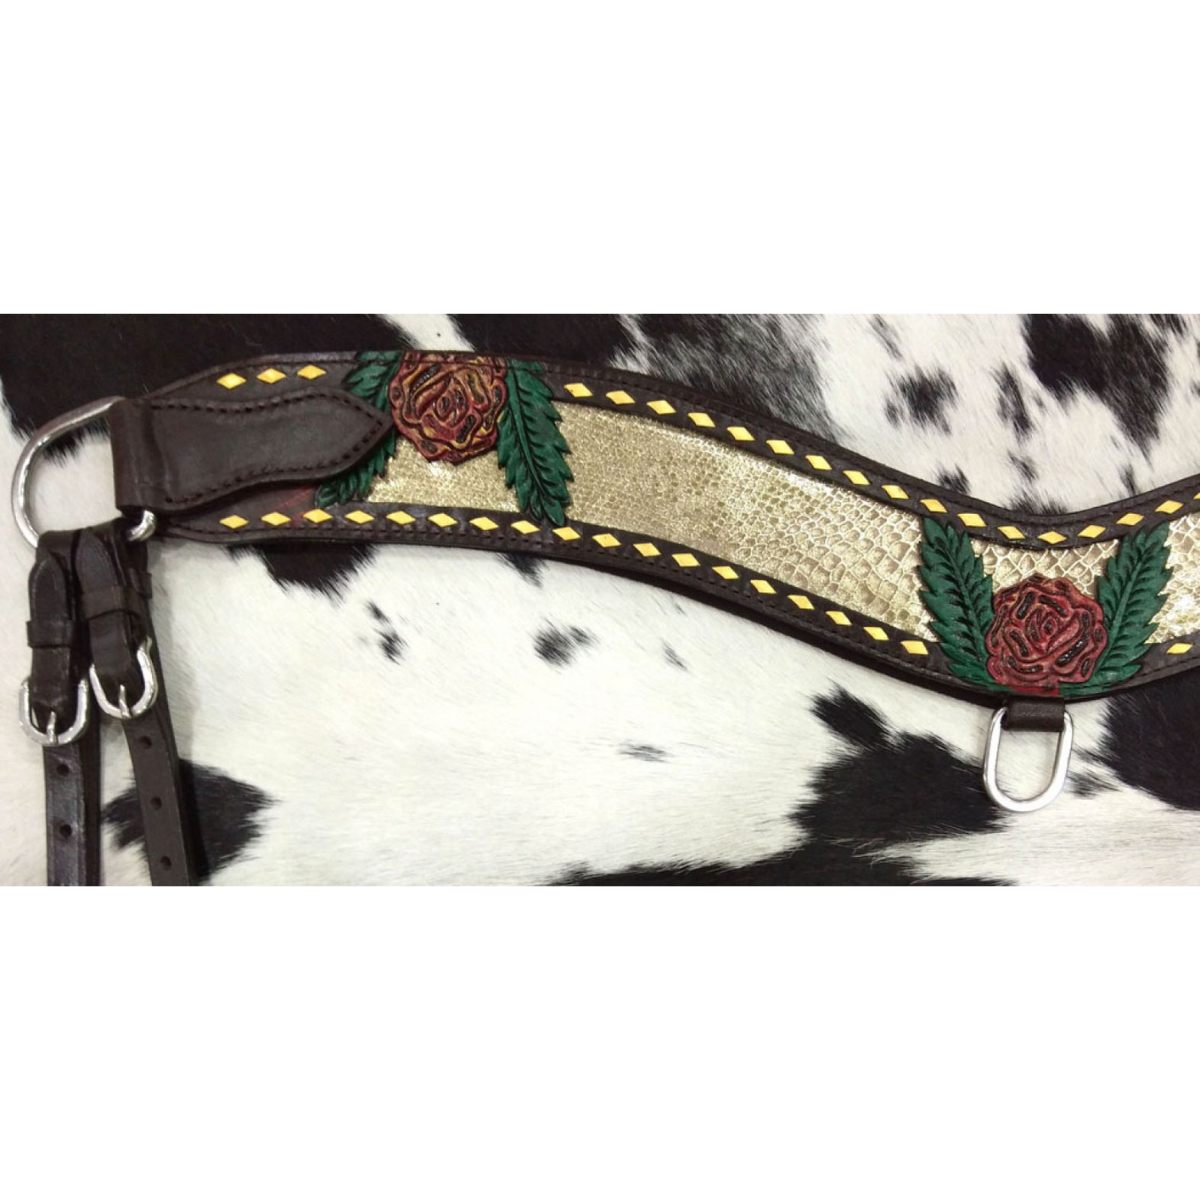 Showman ® Hand Painted Rose tripping collar with gold snakeskin inlay. - Double T Saddles